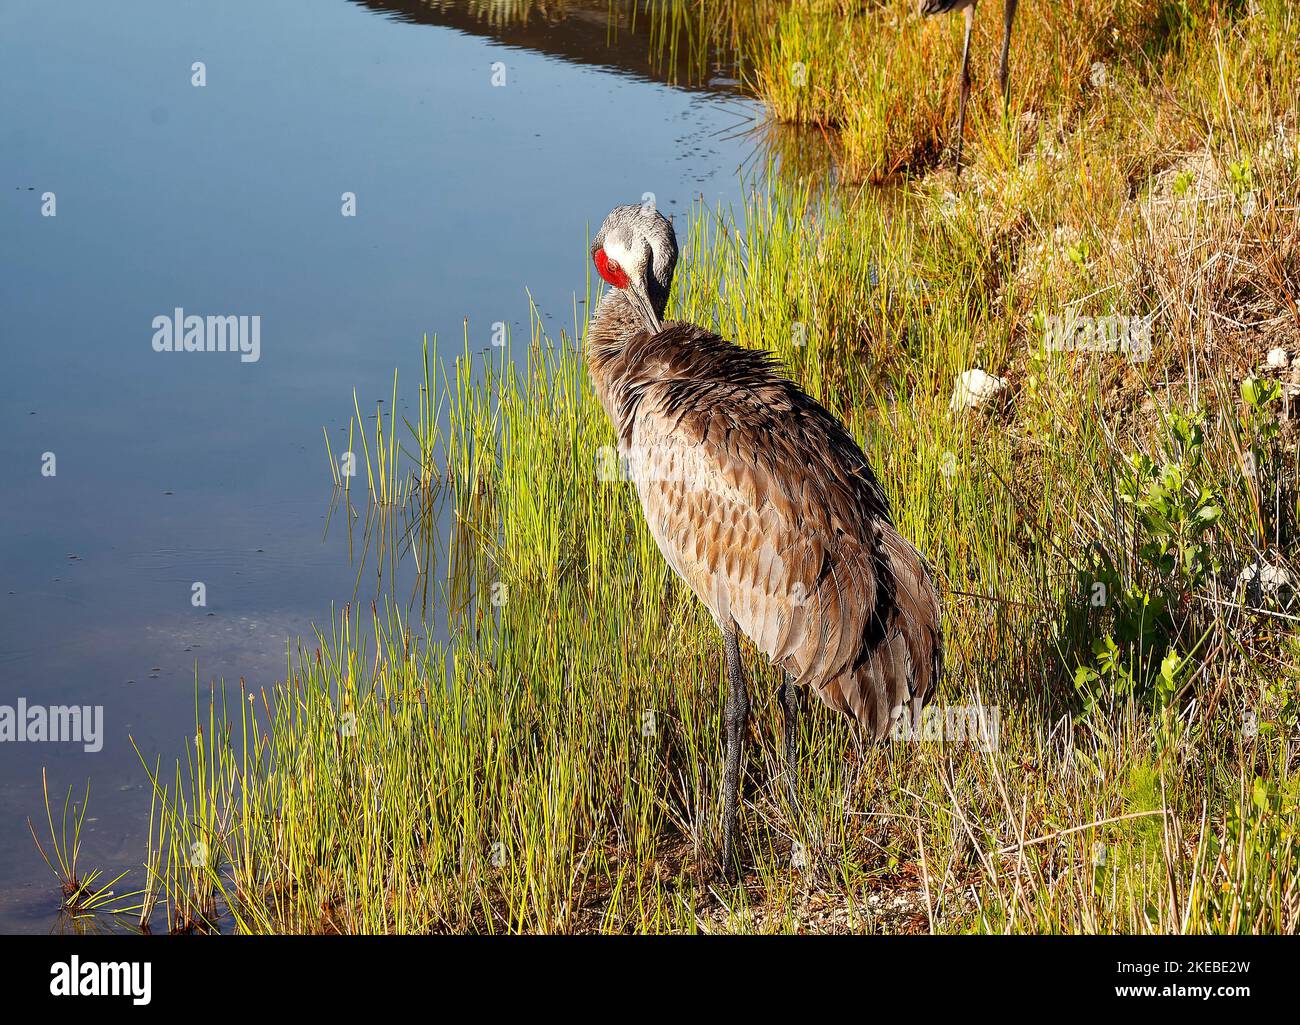 Sandhill Crane, standing beside pond, preening, wild grass, water, very large bird, Grus canadensis, red forehead, tufted rump feathers, long neck, lo Stock Photo